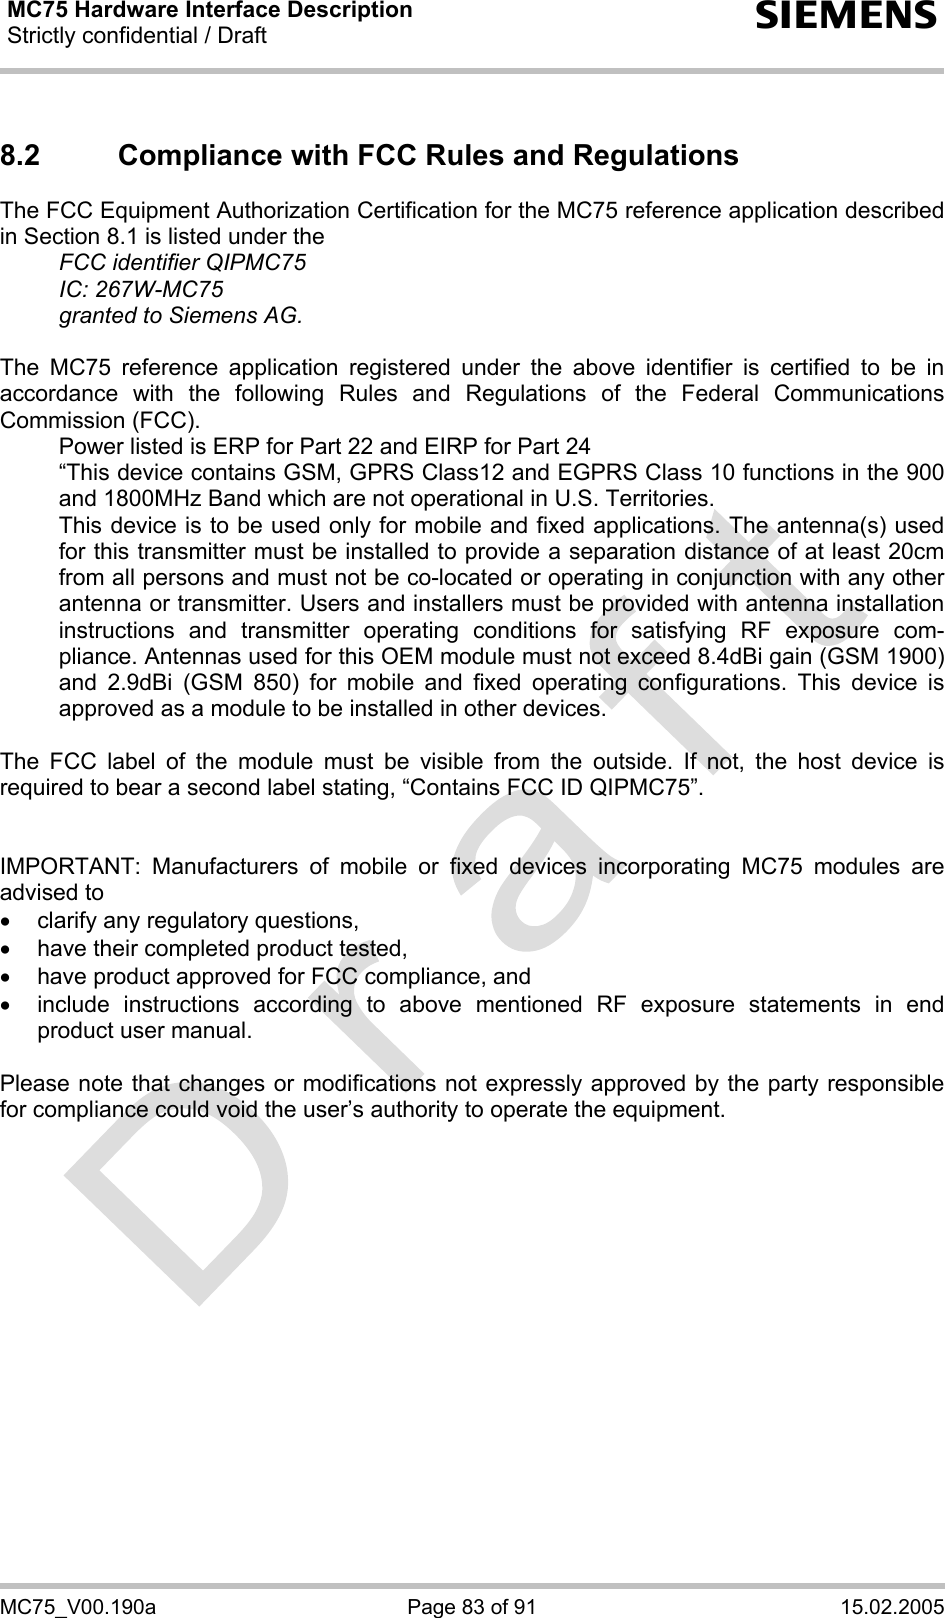 MC75 Hardware Interface Description Strictly confidential / Draft  s MC75_V00.190a  Page 83 of 91  15.02.2005 8.2  Compliance with FCC Rules and Regulations  The FCC Equipment Authorization Certification for the MC75 reference application described in Section 8.1 is listed under the   FCC identifier QIPMC75  IC: 267W-MC75   granted to Siemens AG.   The MC75 reference application registered under the above identifier is certified to be in accordance with the following Rules and Regulations of the Federal Communications Commission (FCC).    Power listed is ERP for Part 22 and EIRP for Part 24   “This device contains GSM, GPRS Class12 and EGPRS Class 10 functions in the 900 and 1800MHz Band which are not operational in U.S. Territories.    This device is to be used only for mobile and fixed applications. The antenna(s) used for this transmitter must be installed to provide a separation distance of at least 20cm from all persons and must not be co-located or operating in conjunction with any other antenna or transmitter. Users and installers must be provided with antenna installation instructions and transmitter operating conditions for satisfying RF exposure com-pliance. Antennas used for this OEM module must not exceed 8.4dBi gain (GSM 1900) and 2.9dBi (GSM 850) for mobile and fixed operating configurations. This device is approved as a module to be installed in other devices.   The FCC label of the module must be visible from the outside. If not, the host device is required to bear a second label stating, “Contains FCC ID QIPMC75”.   IMPORTANT: Manufacturers of mobile or fixed devices incorporating MC75 modules are advised to •  clarify any regulatory questions, •  have their completed product tested, •  have product approved for FCC compliance, and •  include instructions according to above mentioned RF exposure statements in end product user manual.   Please note that changes or modifications not expressly approved by the party responsible for compliance could void the user’s authority to operate the equipment.     